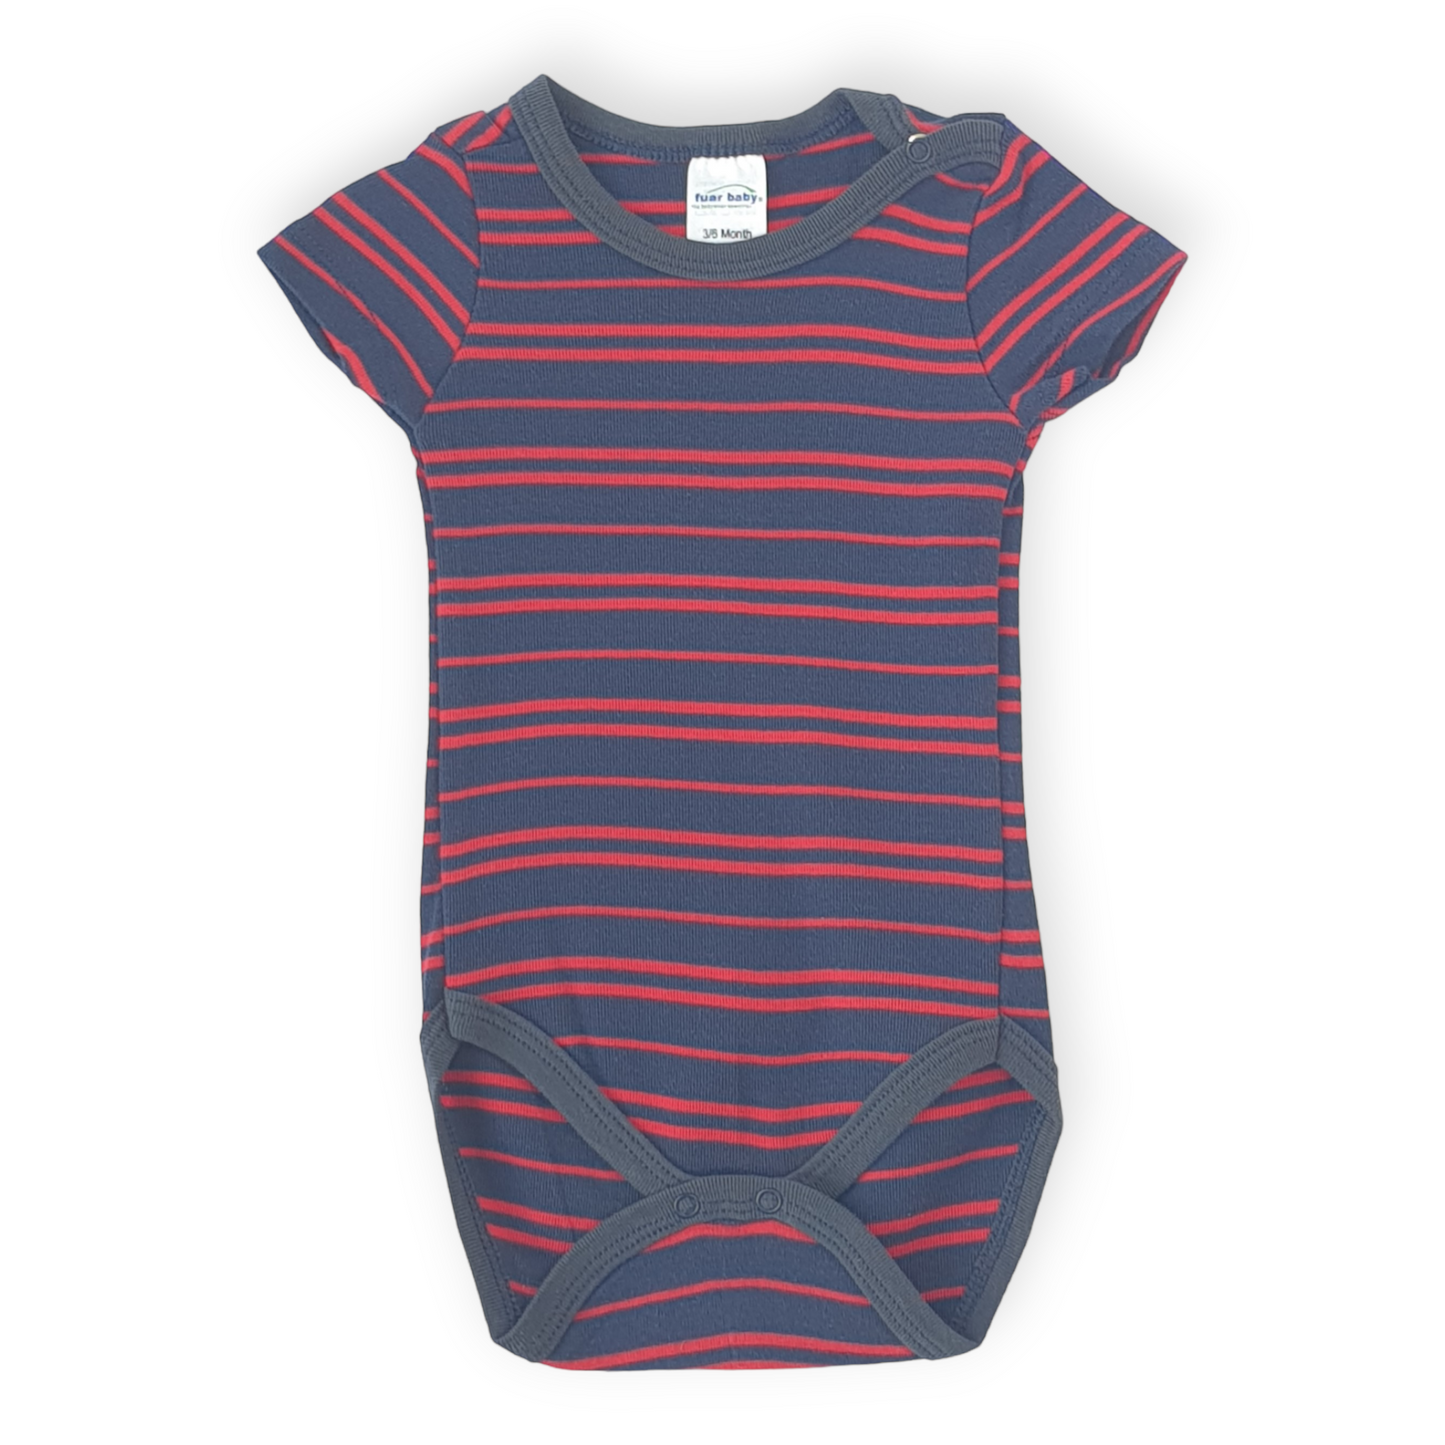 Navy and Red Striped Unisex Body